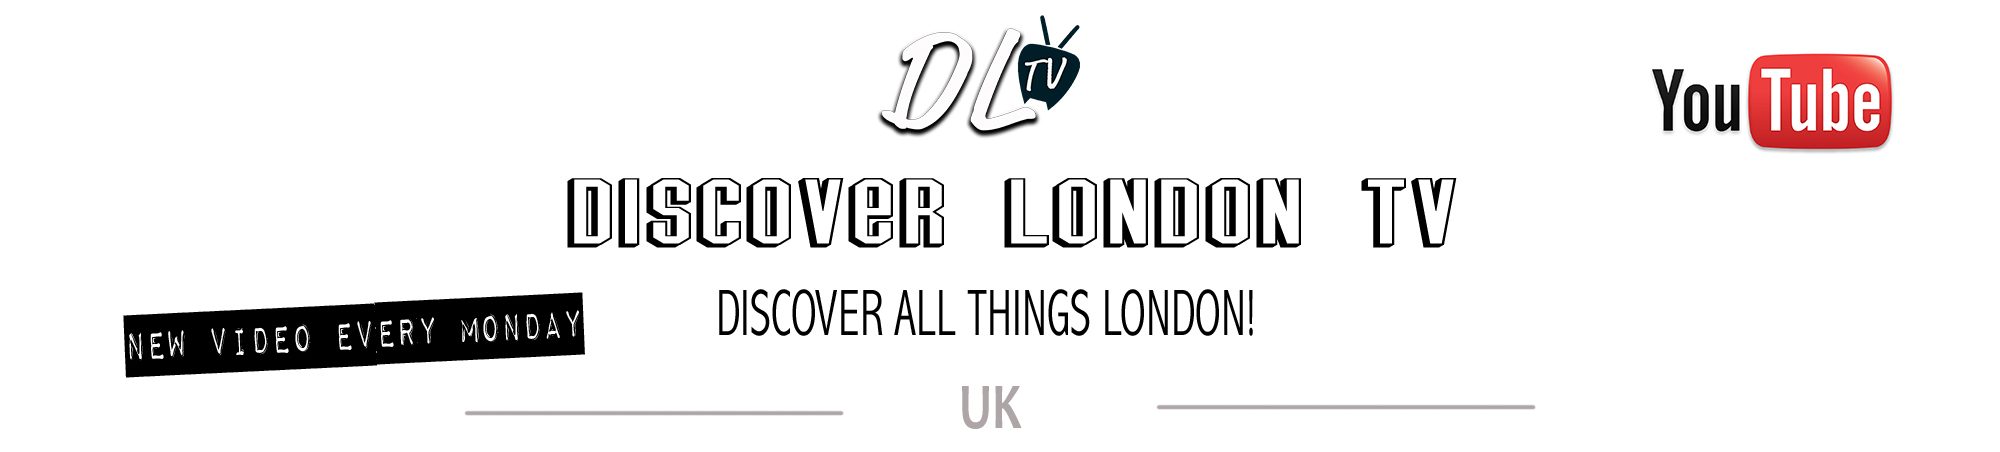 Discover London TV